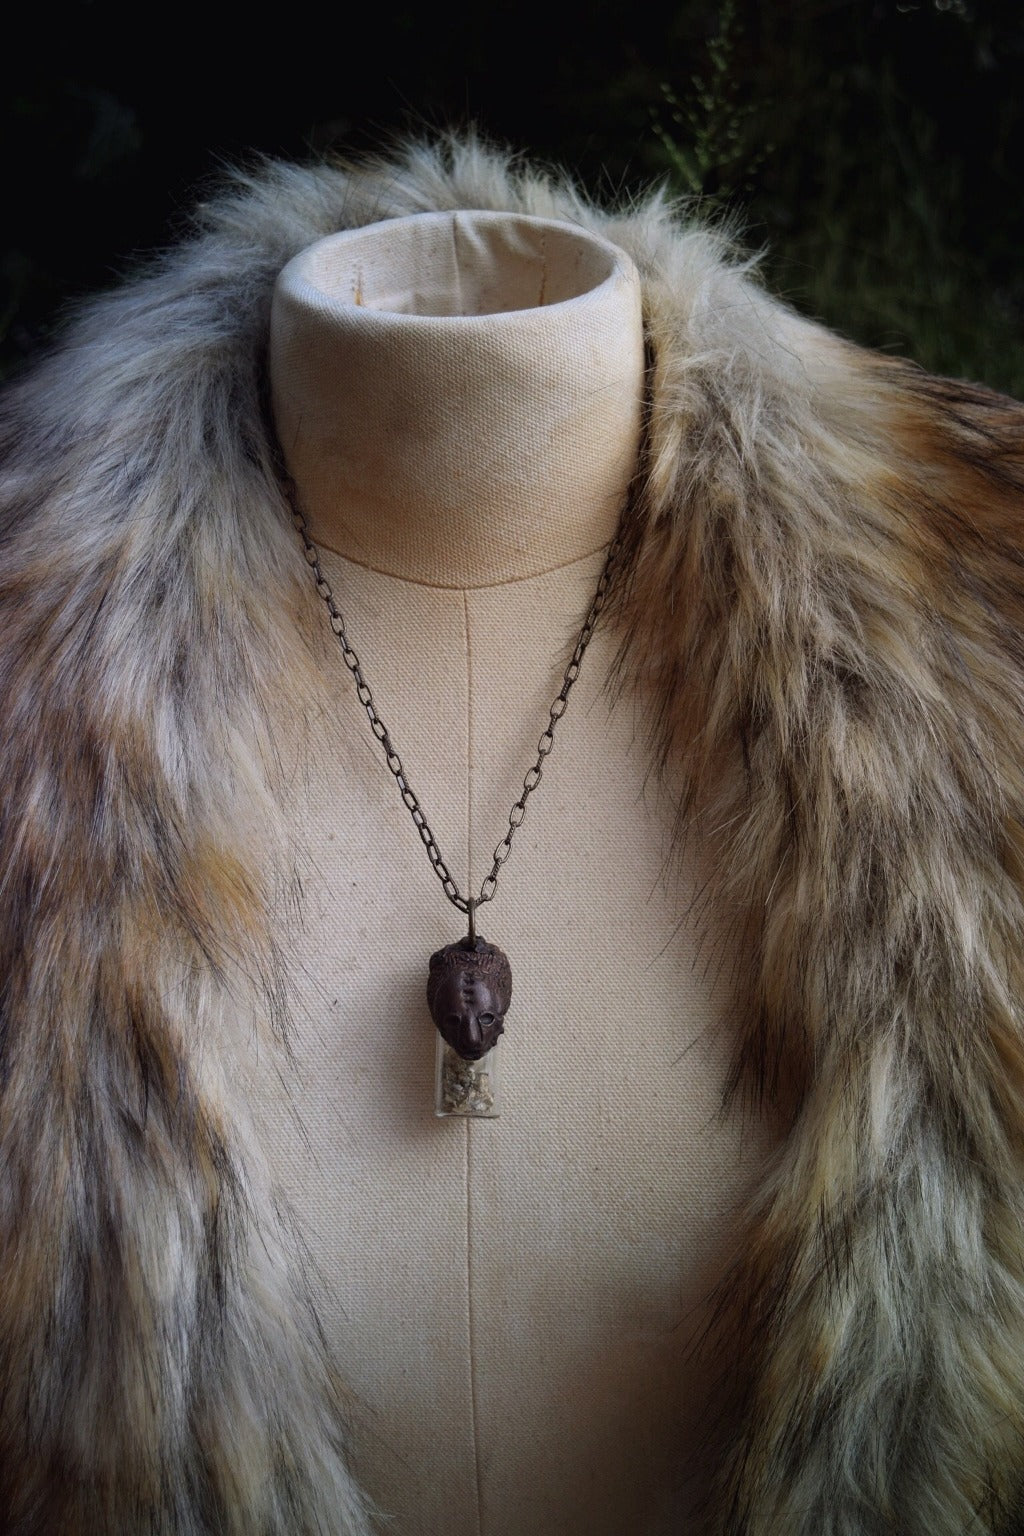 Necklace for Ancient Wisdom, Dreamwork and Intuition